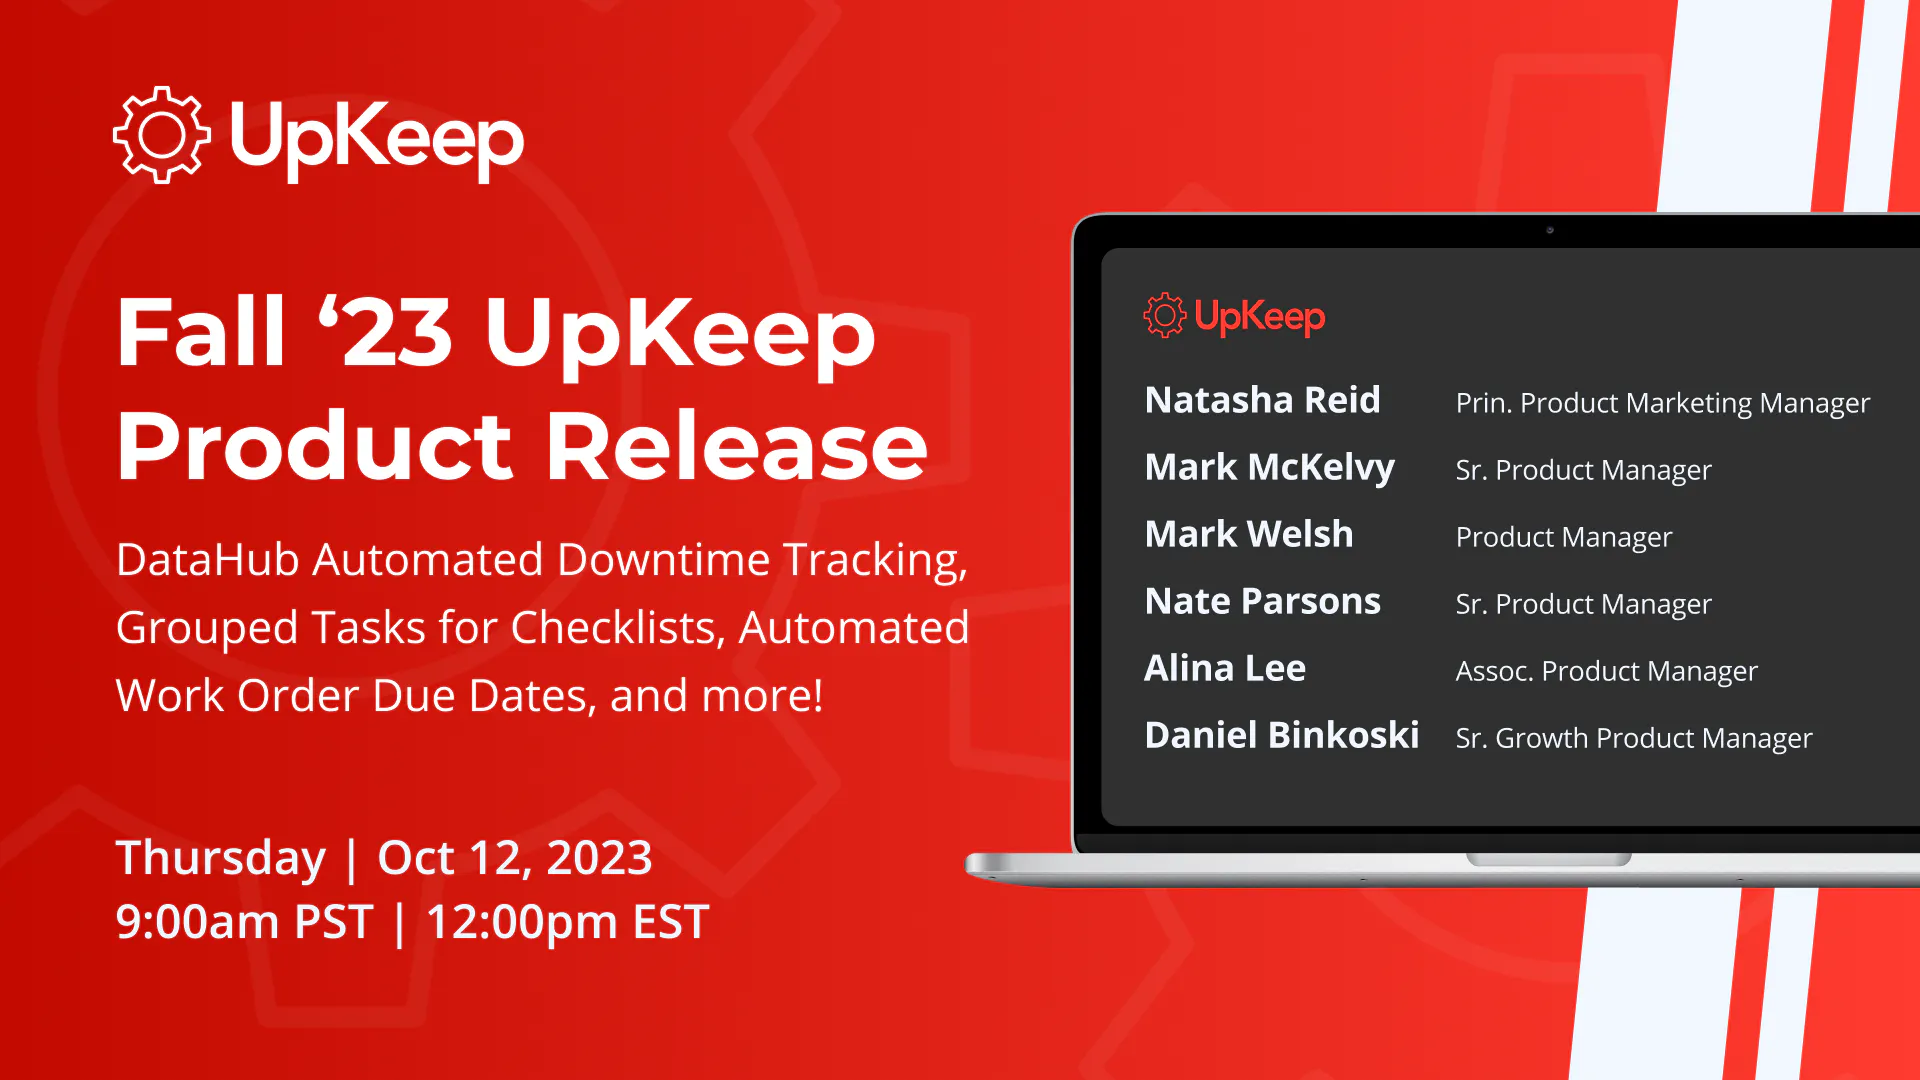 Fall’23 UpKeep Product Release: DataHub Automated Downtime Tracking, Grouped Tasks for Checklists, Automated Work Order Due Dates, and more!